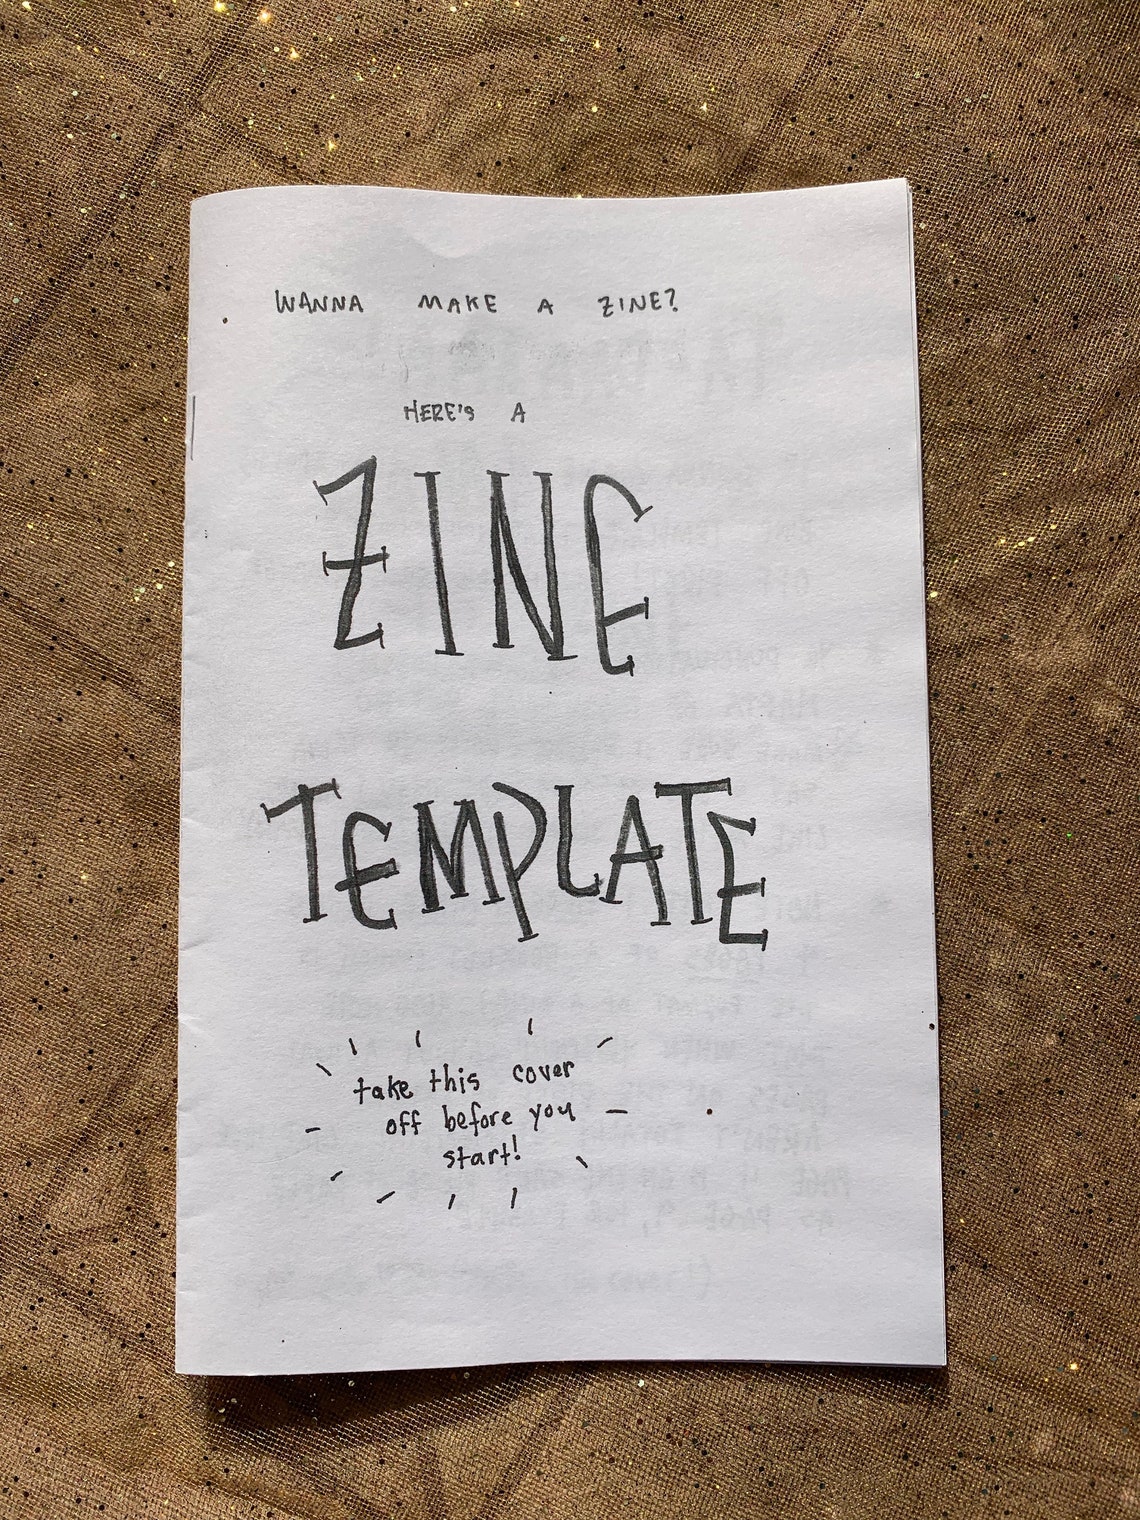 Zine - What is a Zine? Definition, Types, Uses